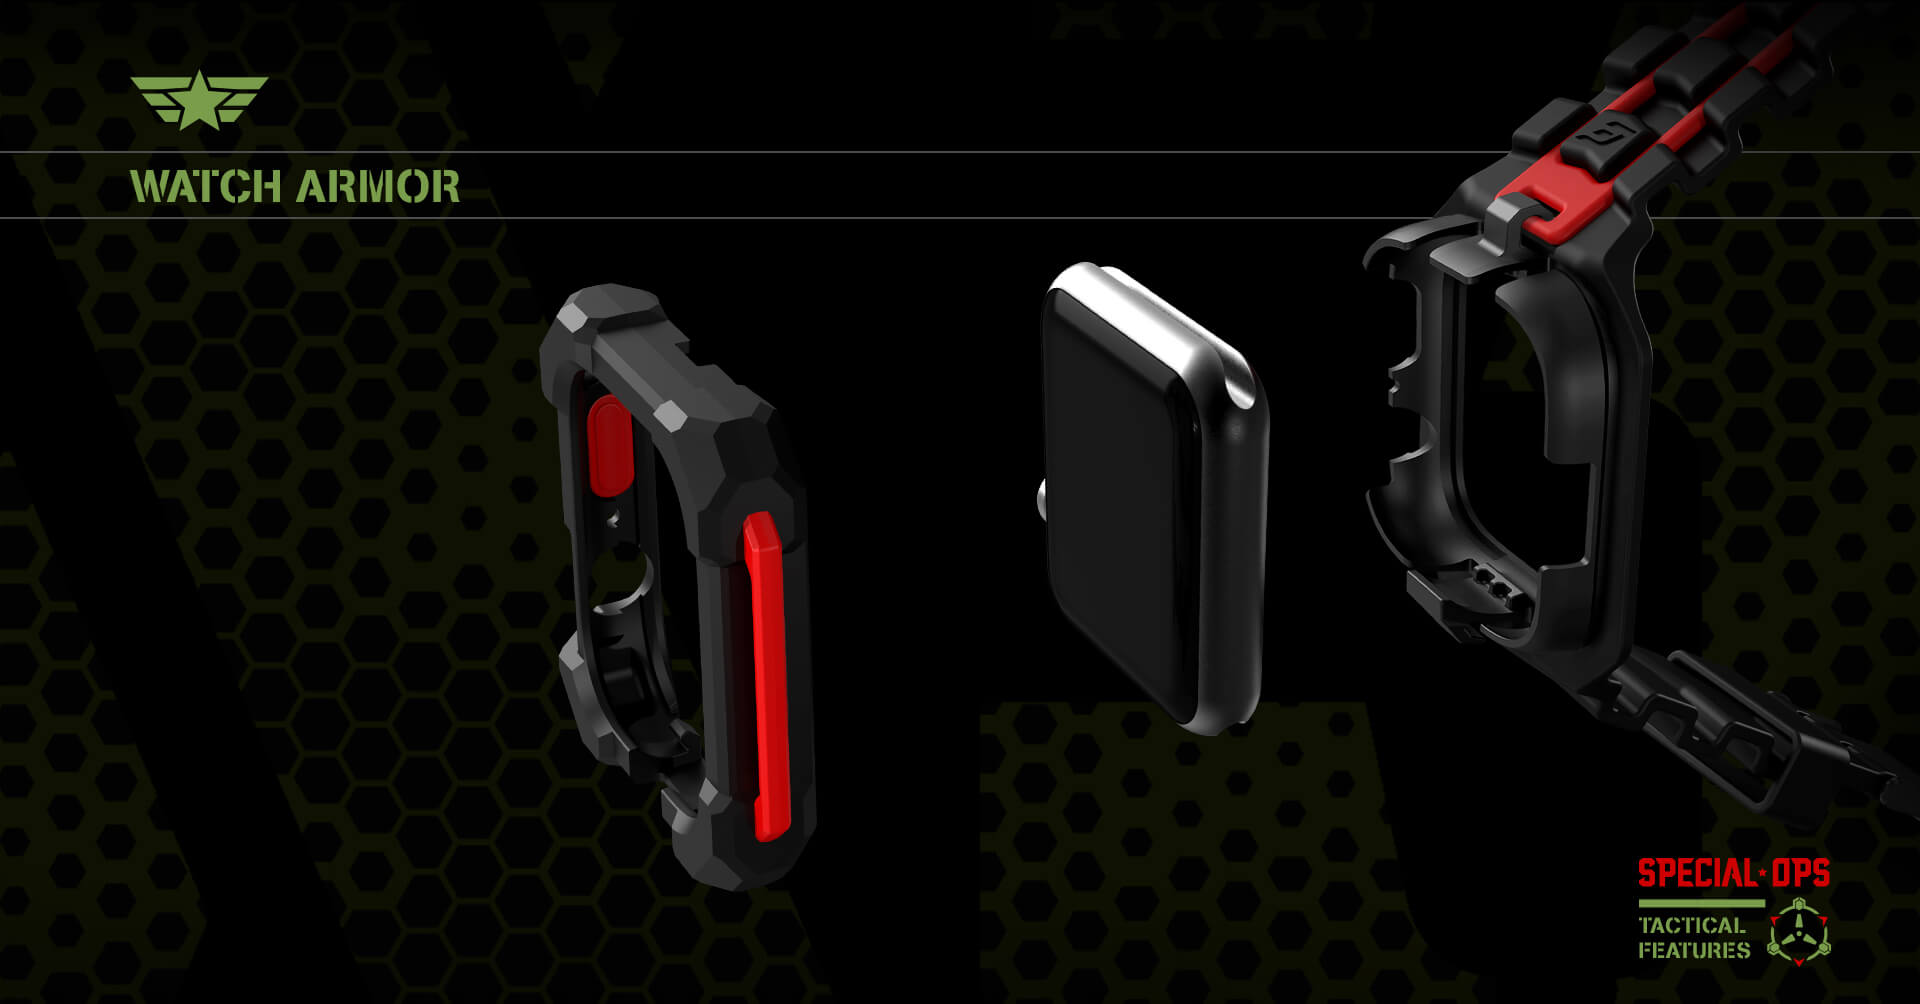 Black Ops Tactical Features—The Ultimate Watch Armor